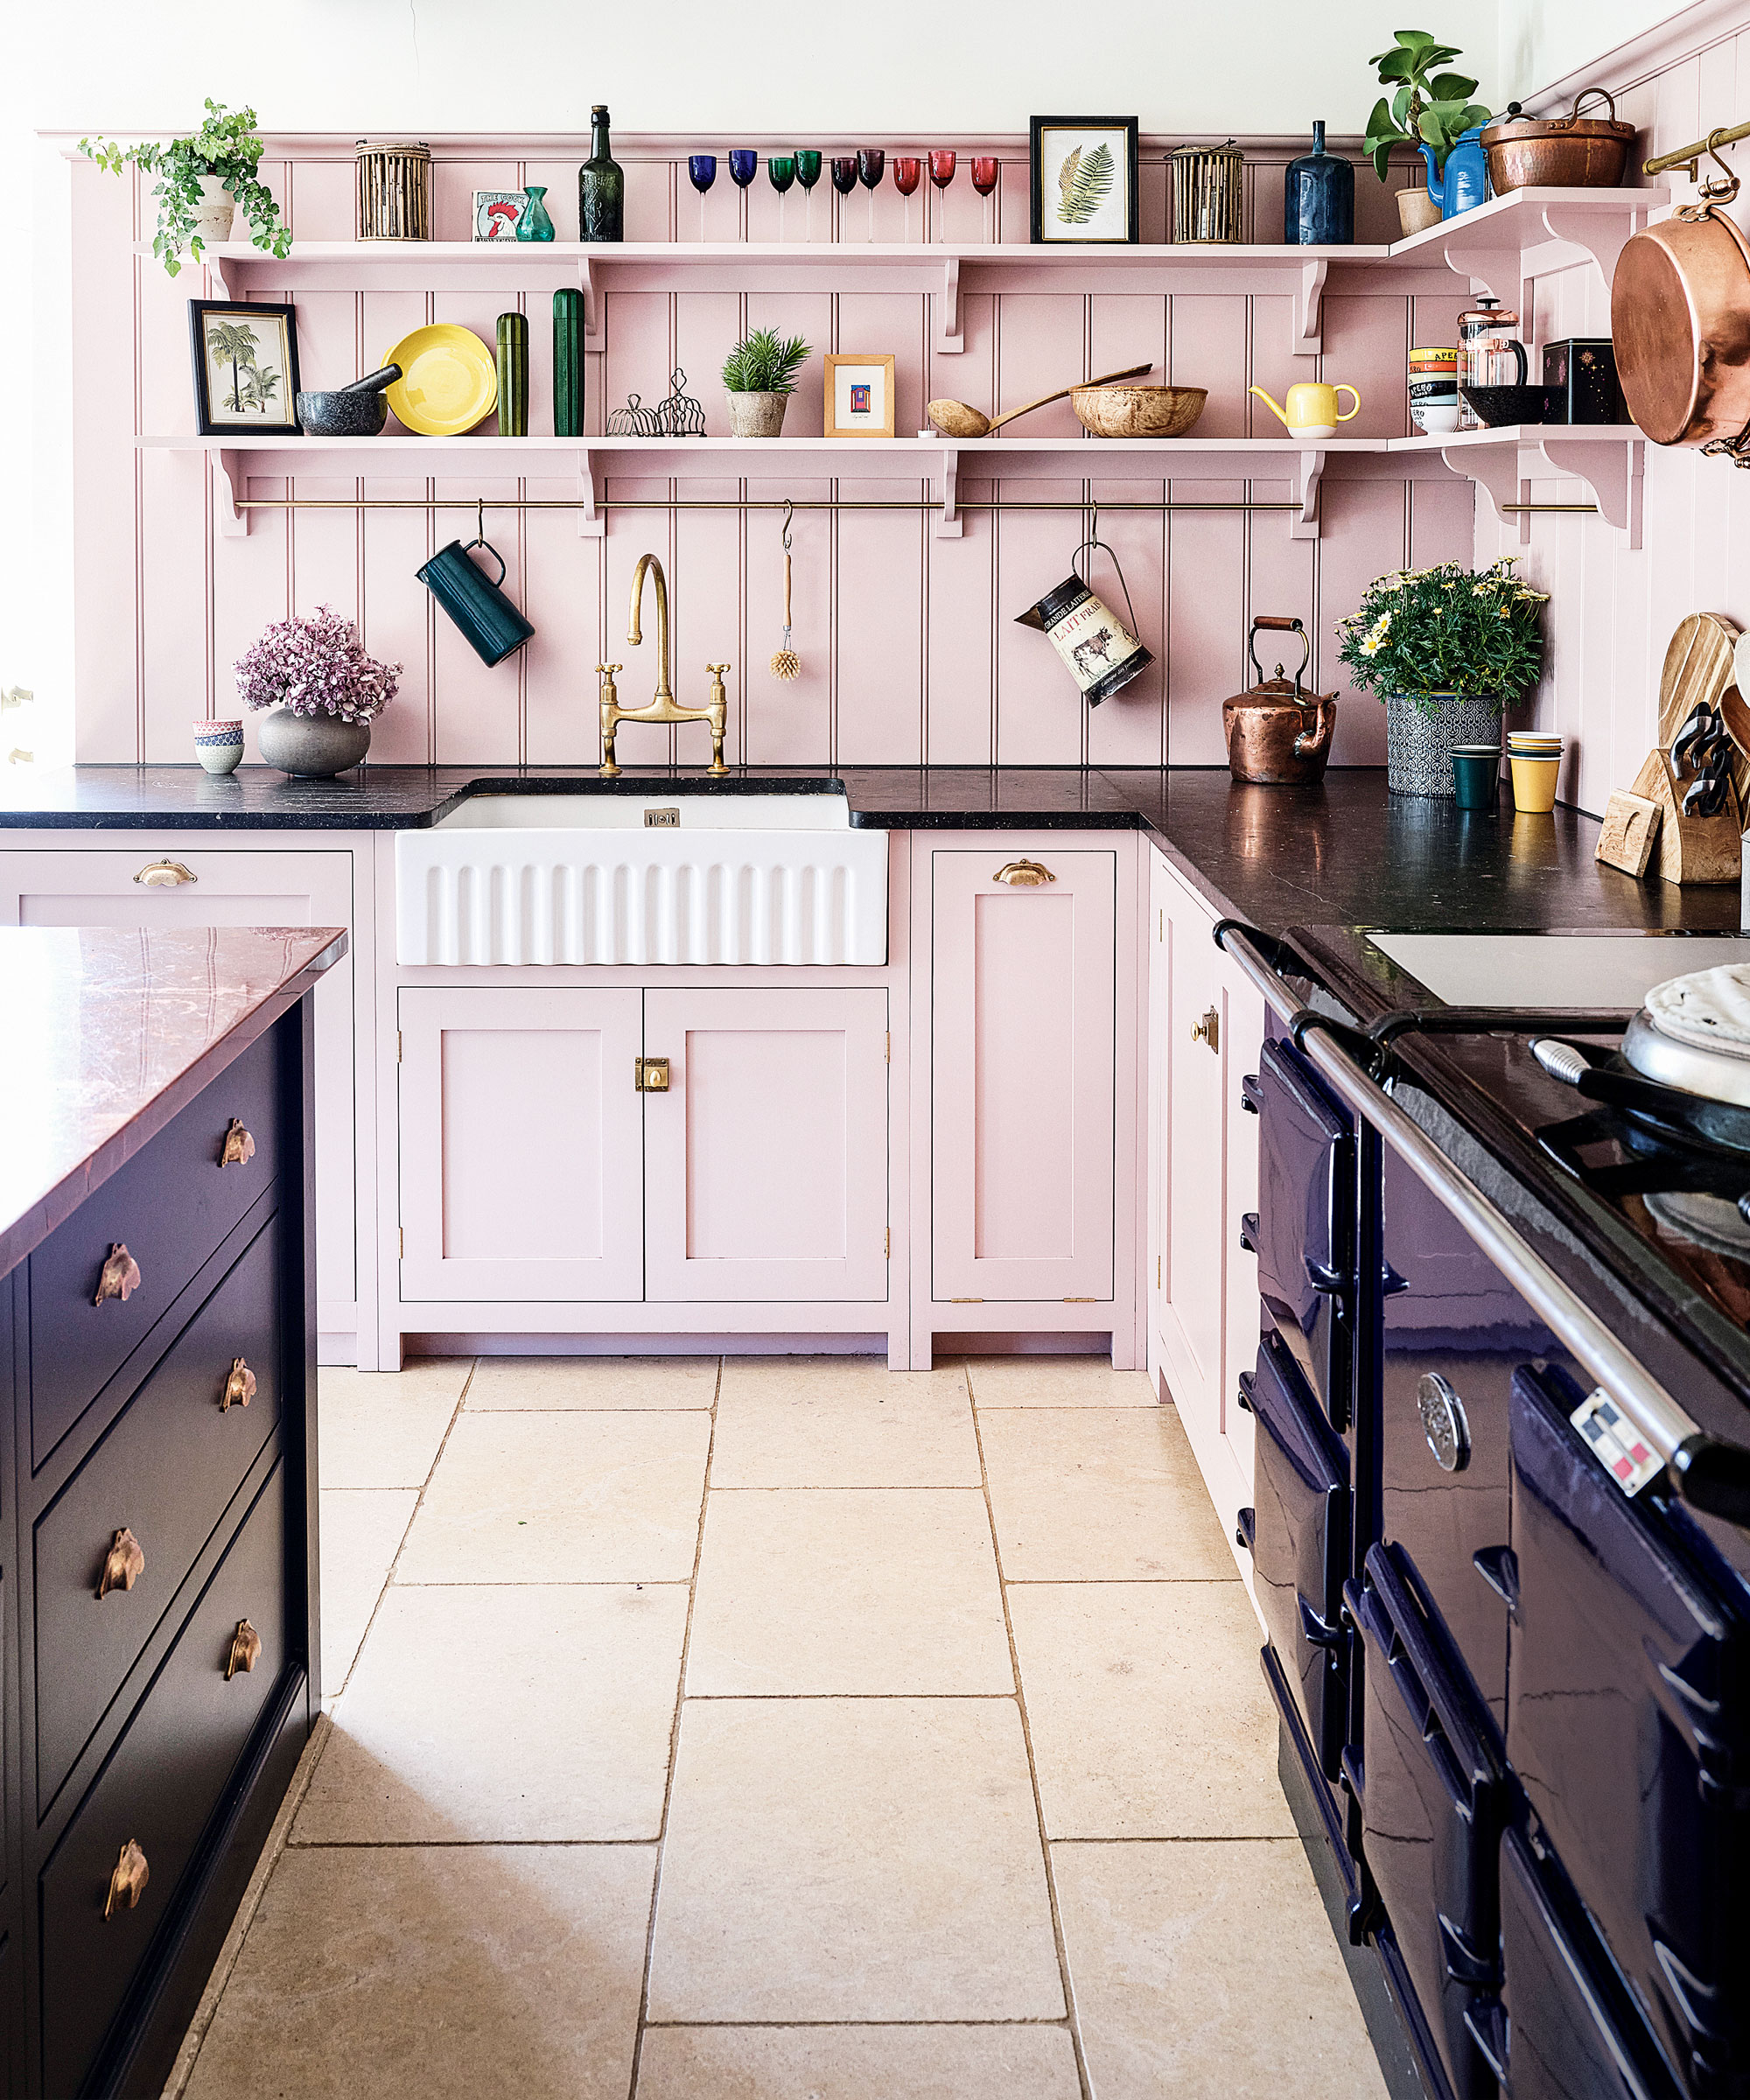 How to update kitchen cabinets without replacing them